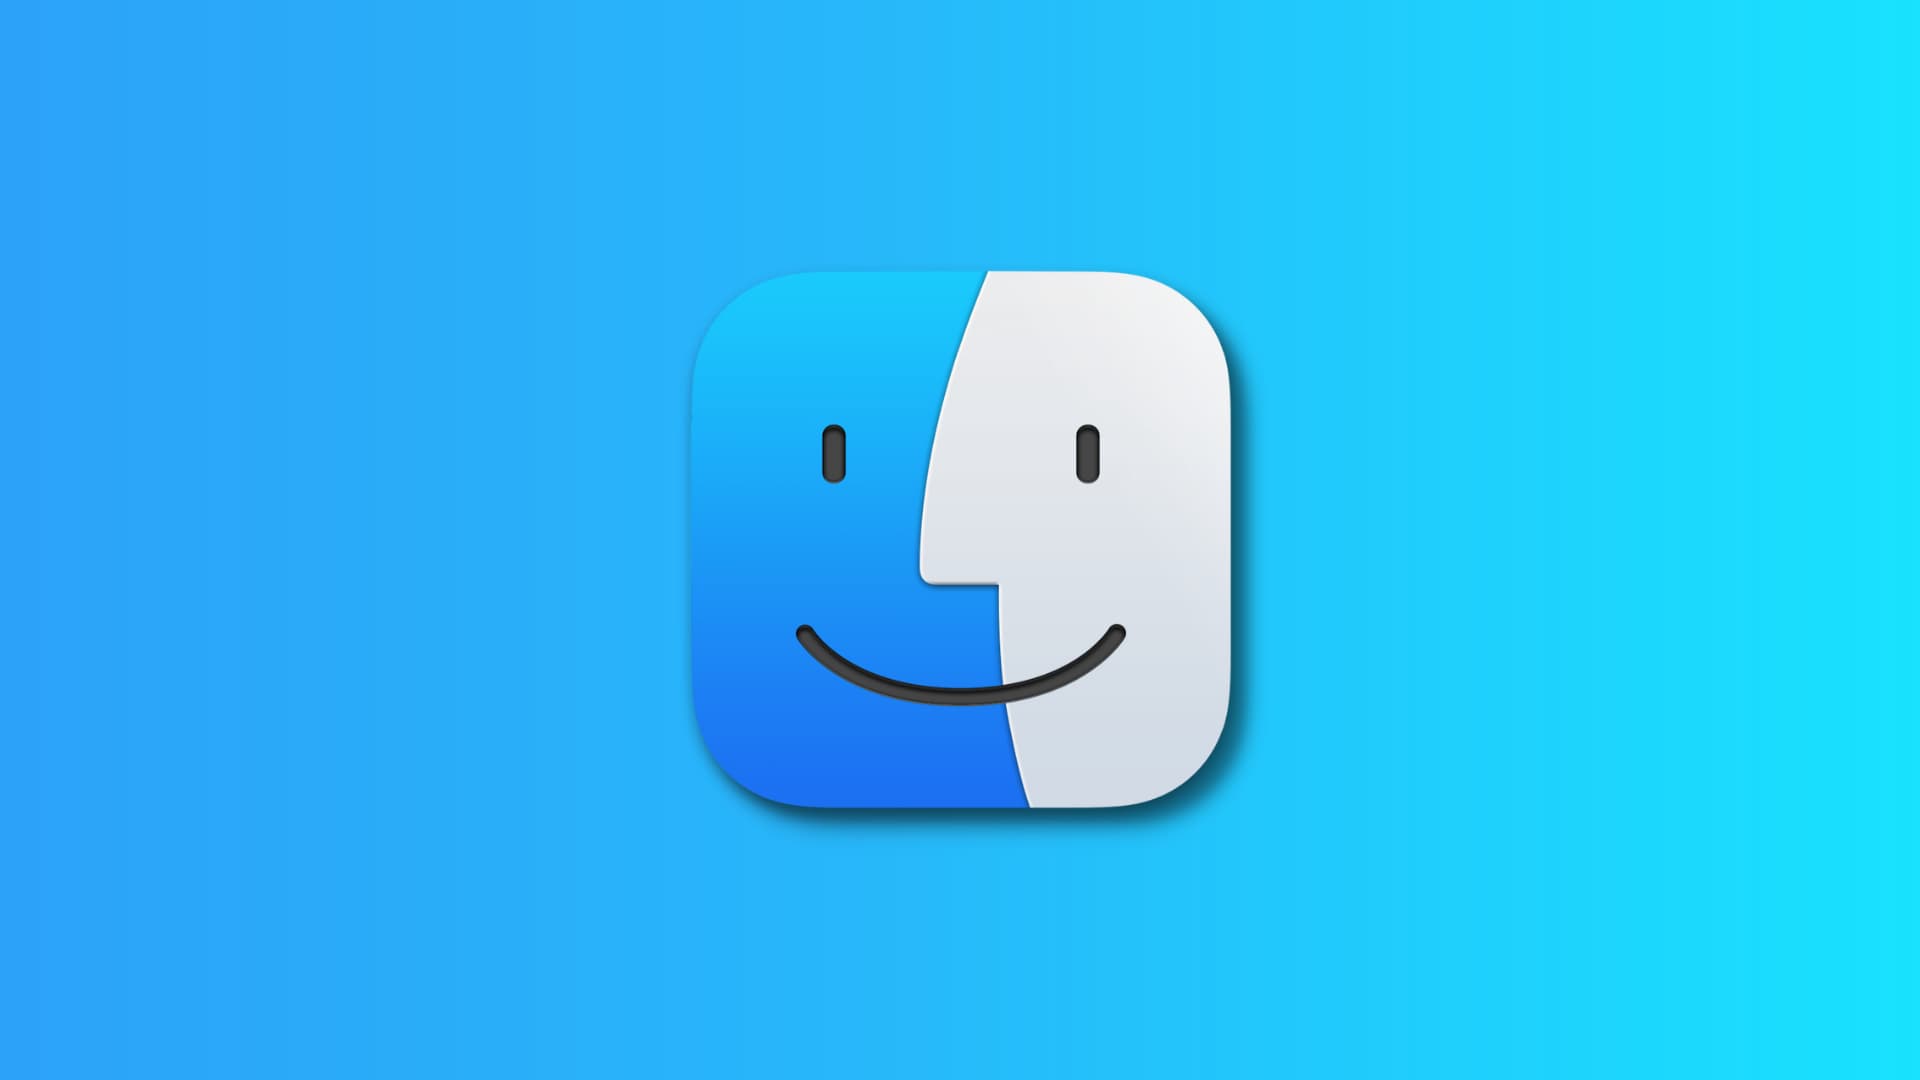 Mac's Finder icon on a blue background